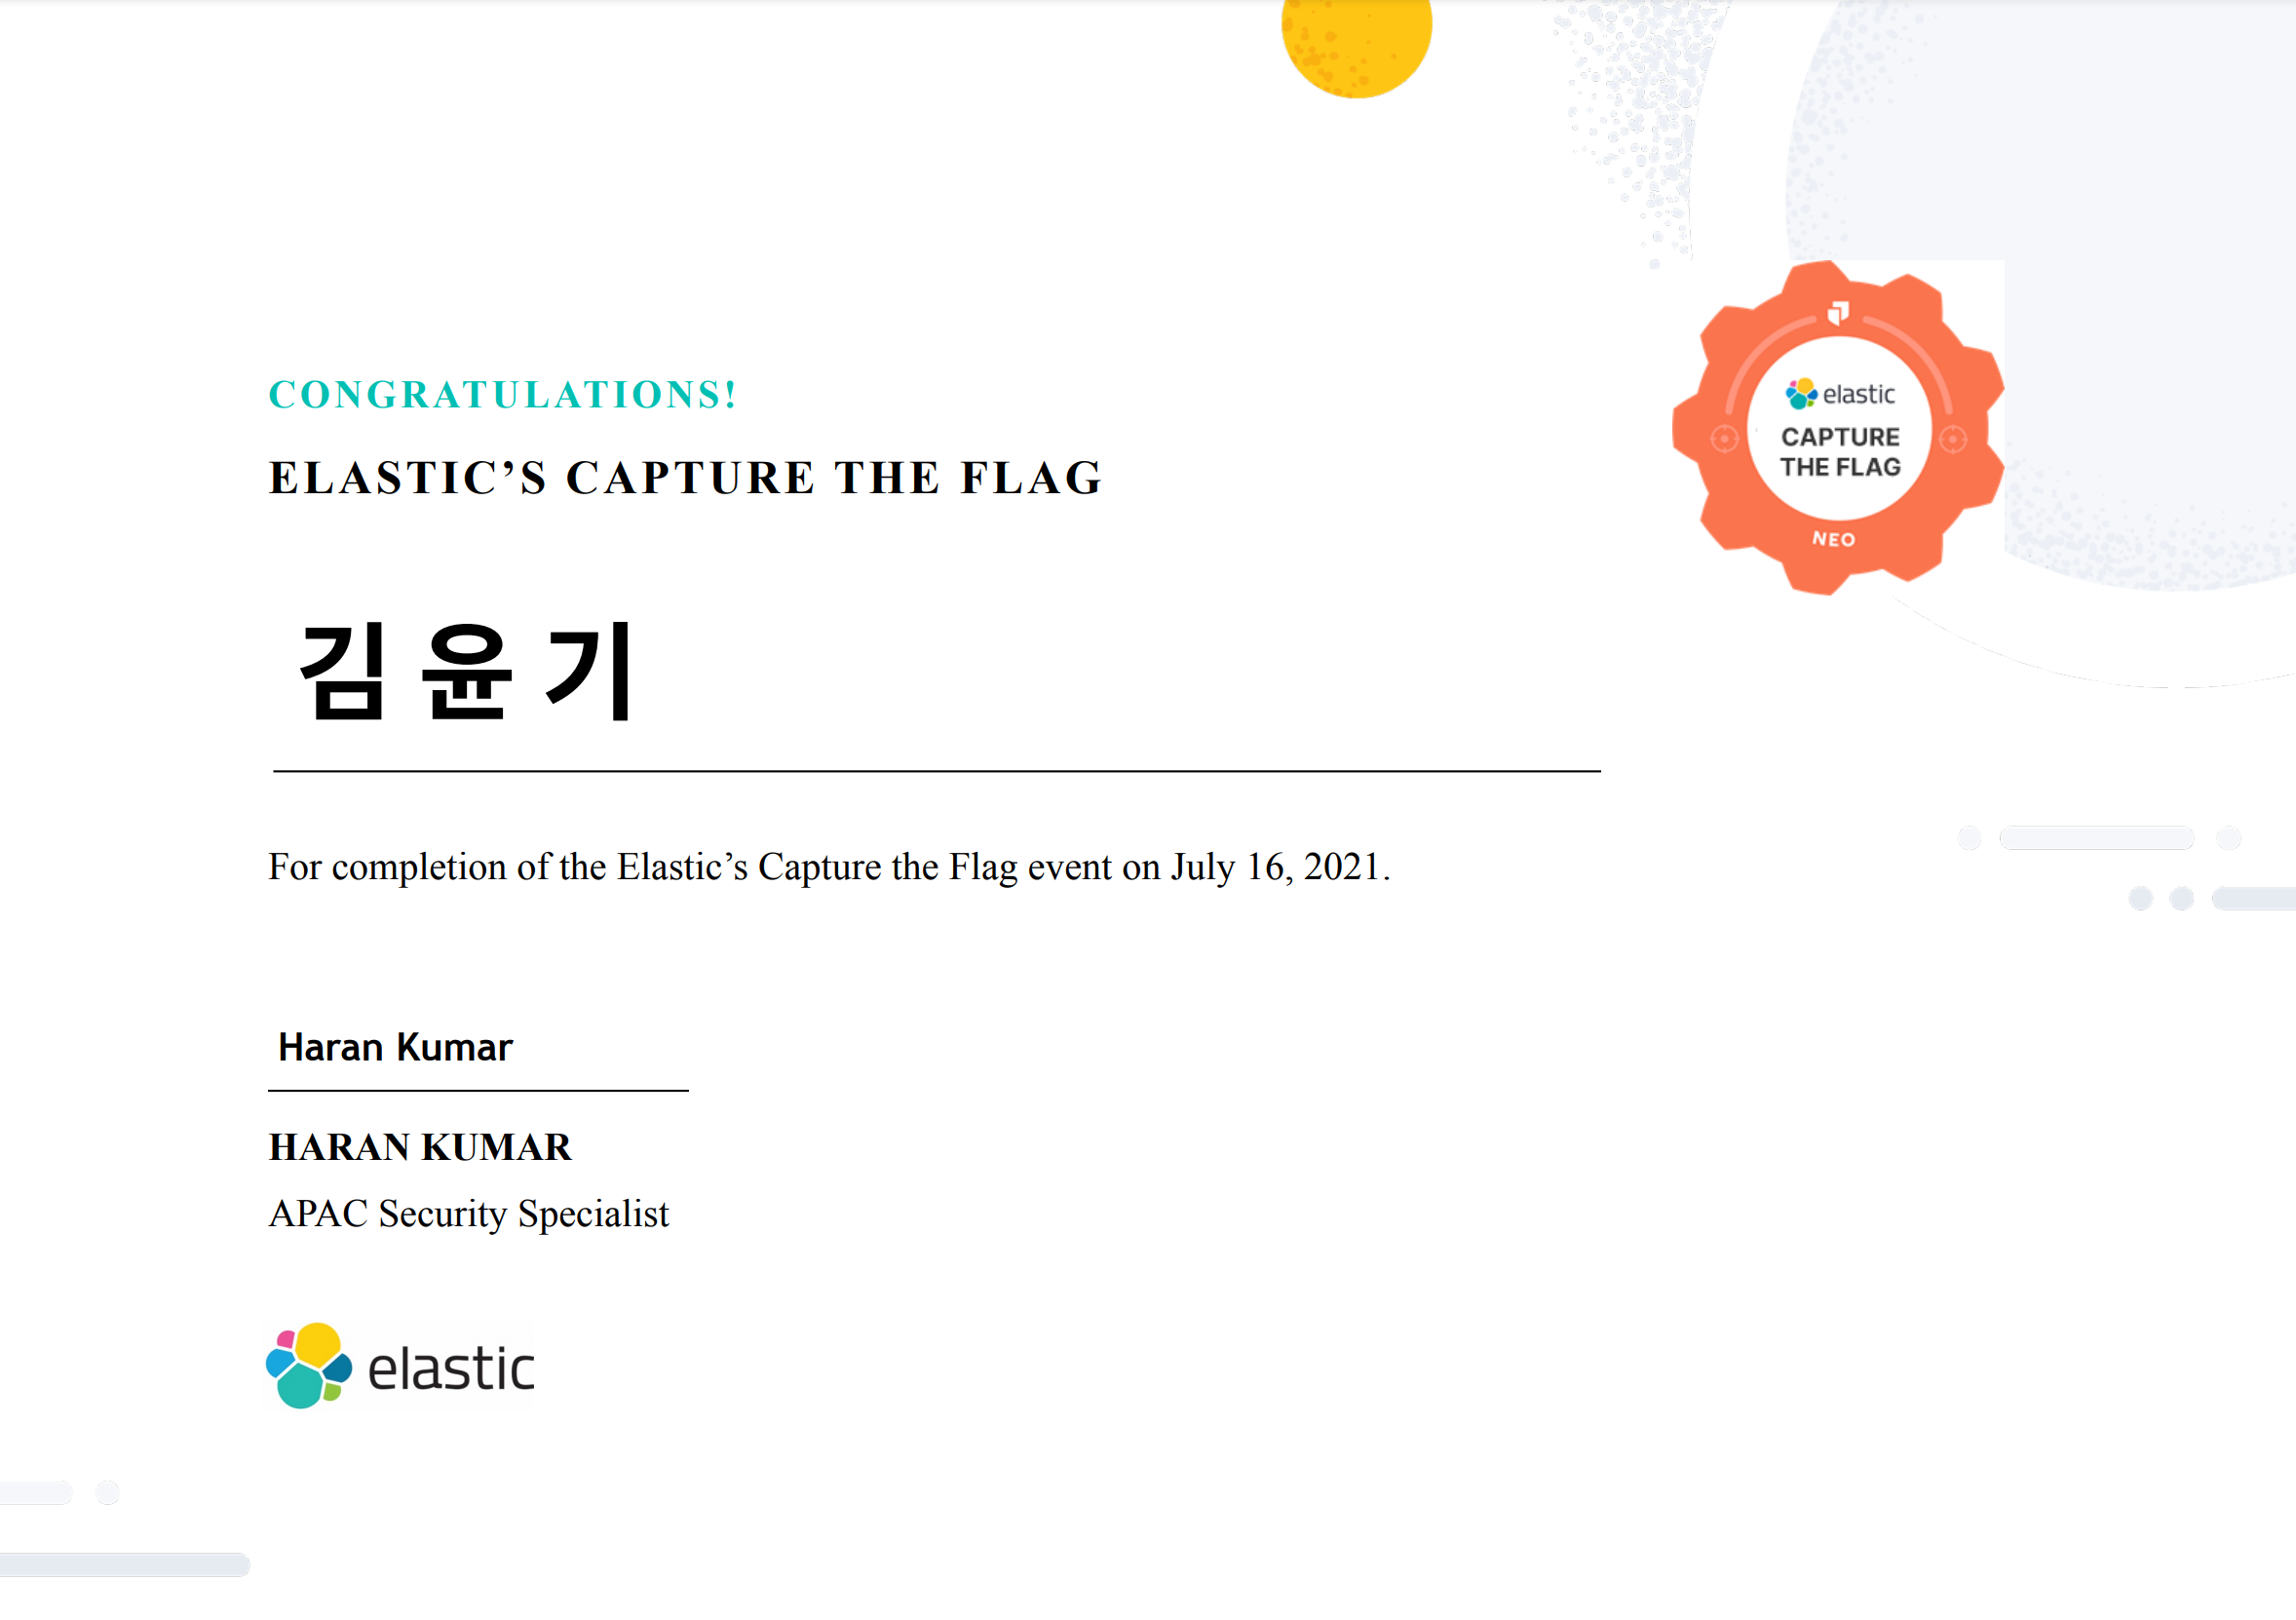 /images/2021-08-09-Elasticsearch-Capture-The-Flag/4.PNG